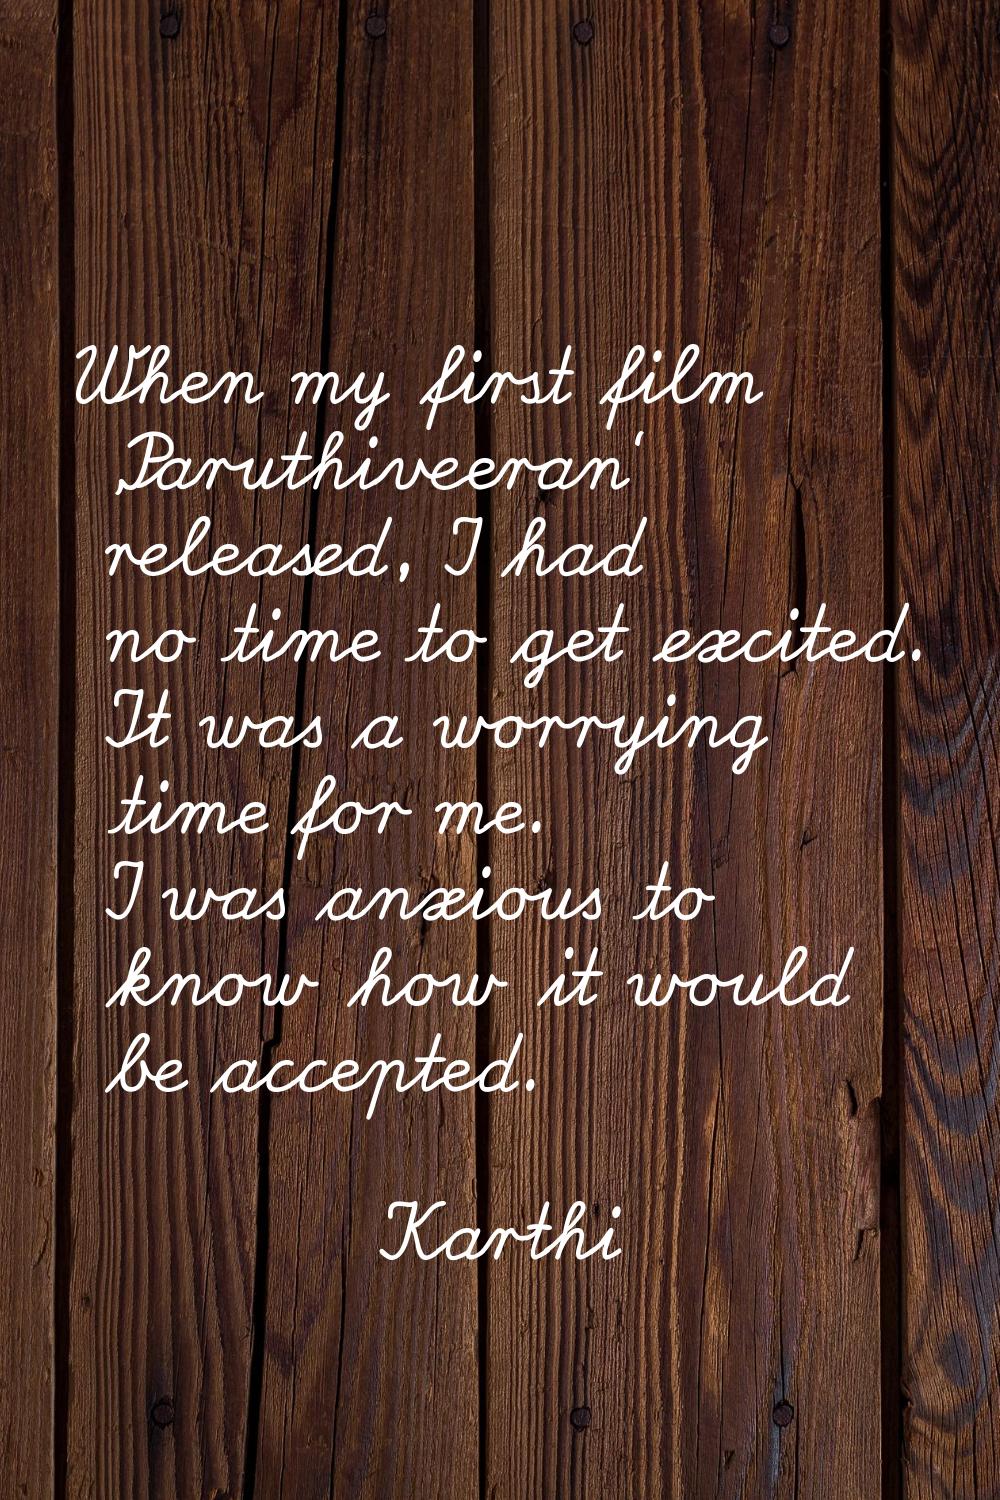 When my first film 'Paruthiveeran' released, I had no time to get excited. It was a worrying time f